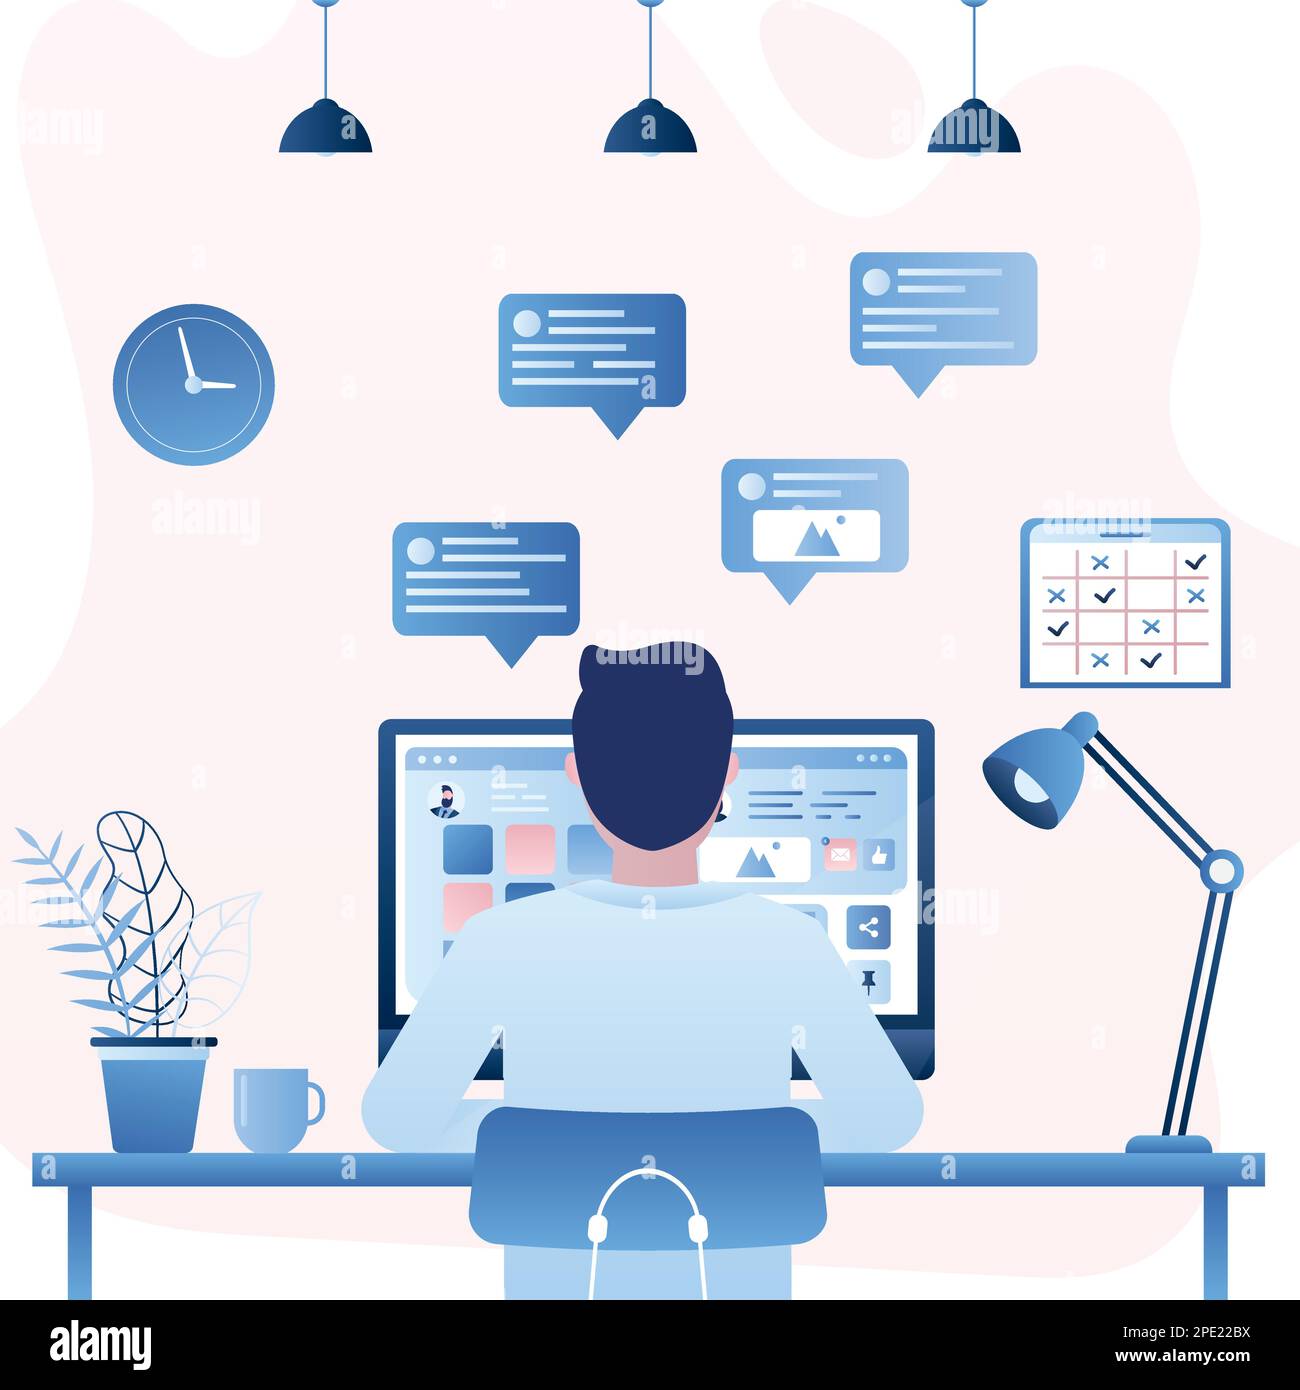 Male back view sits in front of the monitor screen. Social network chatting with speech bubbles. Office day concept background. Office room interior w Stock Vector